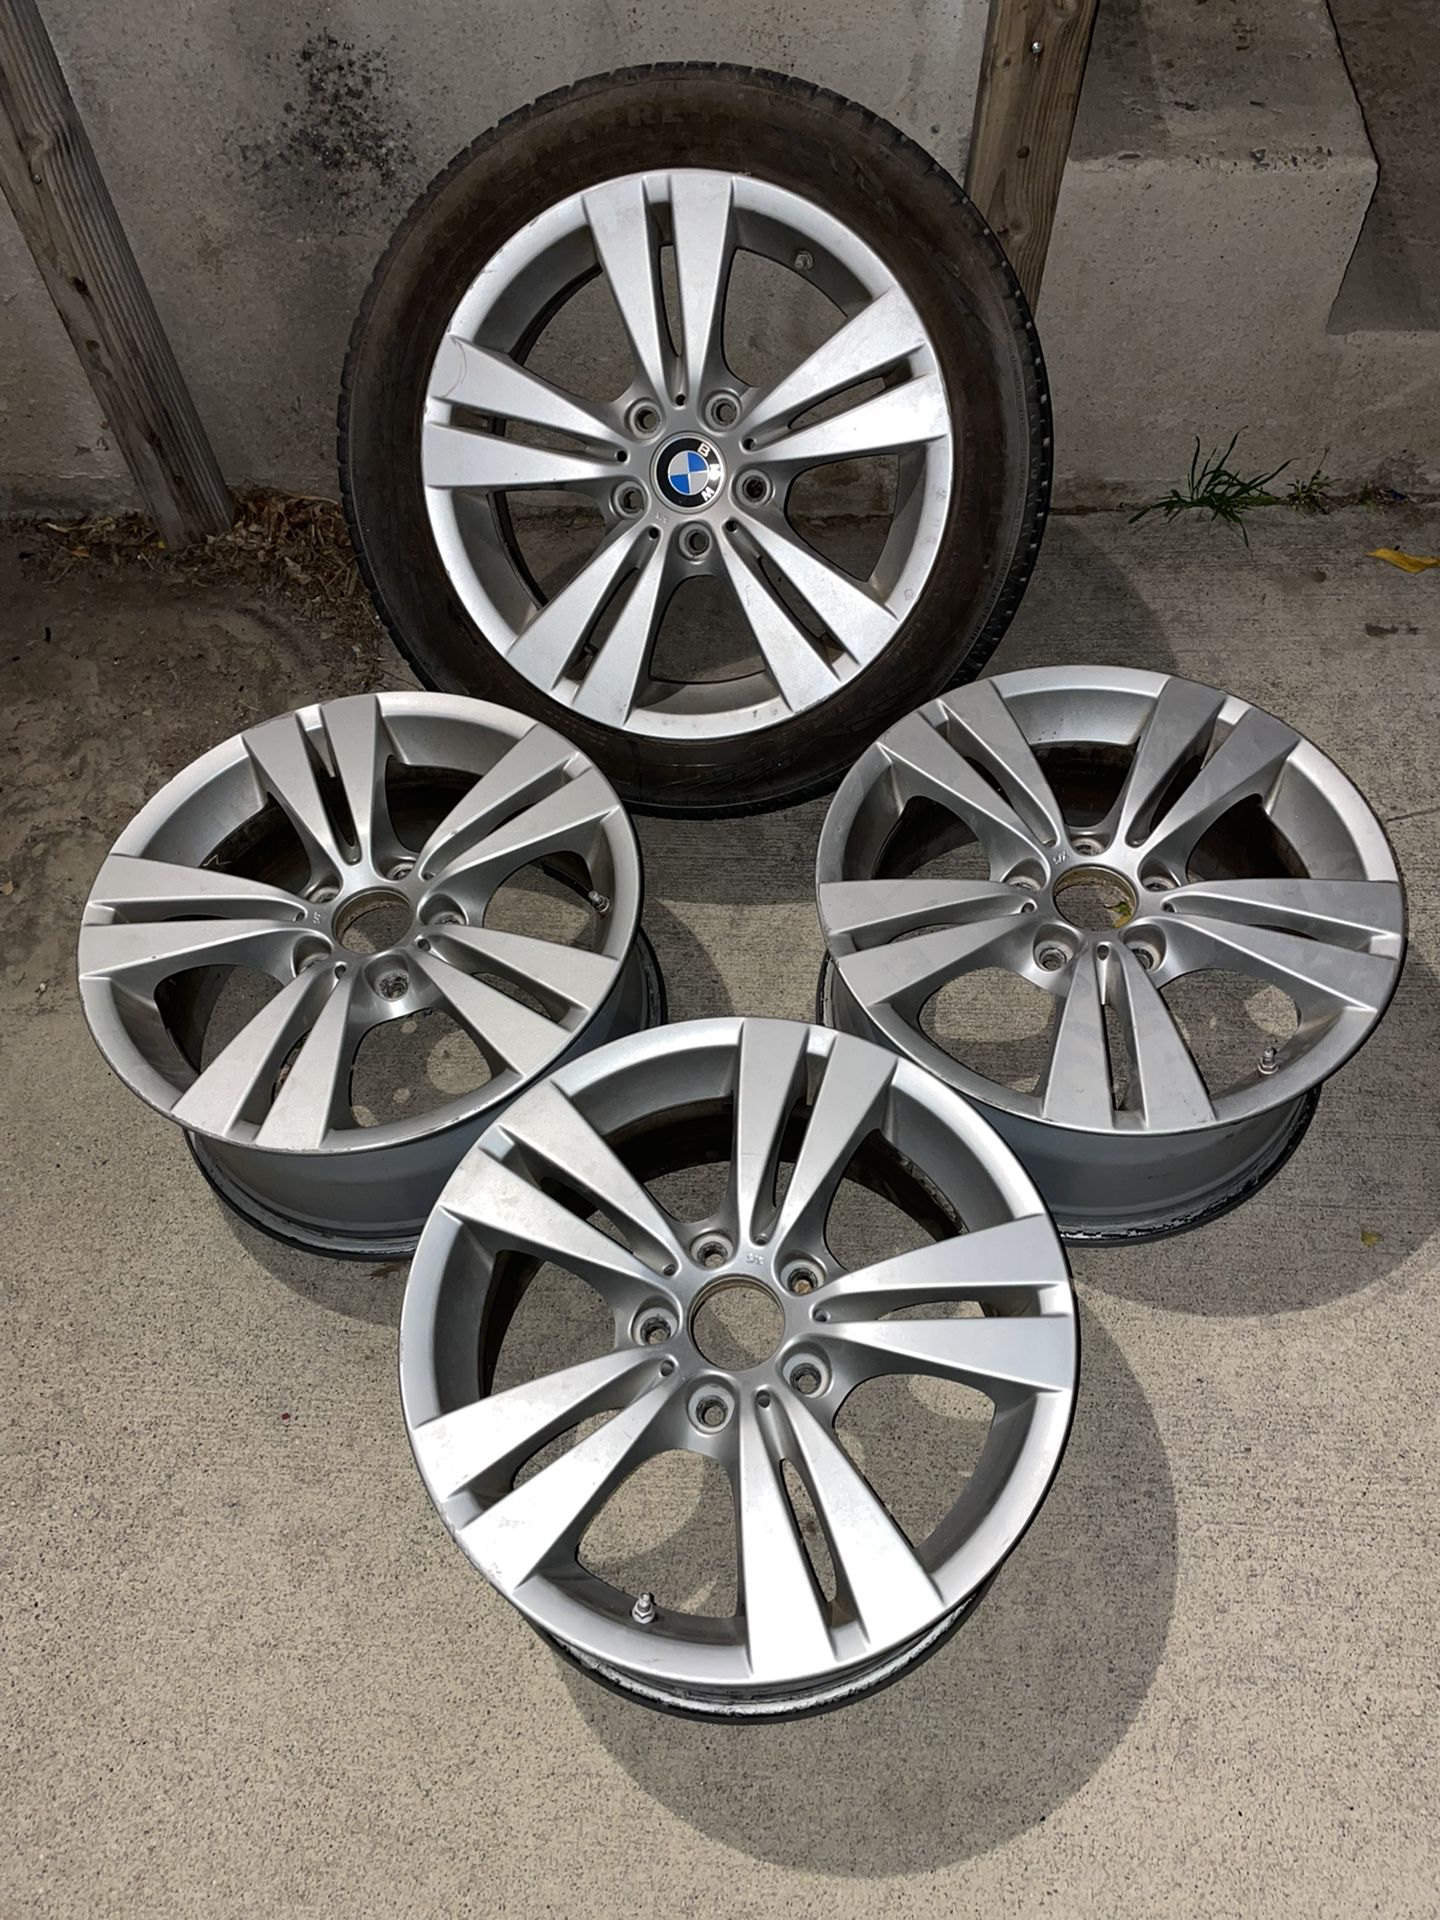 BMW Rims In Good Condition Some Curb Dings 